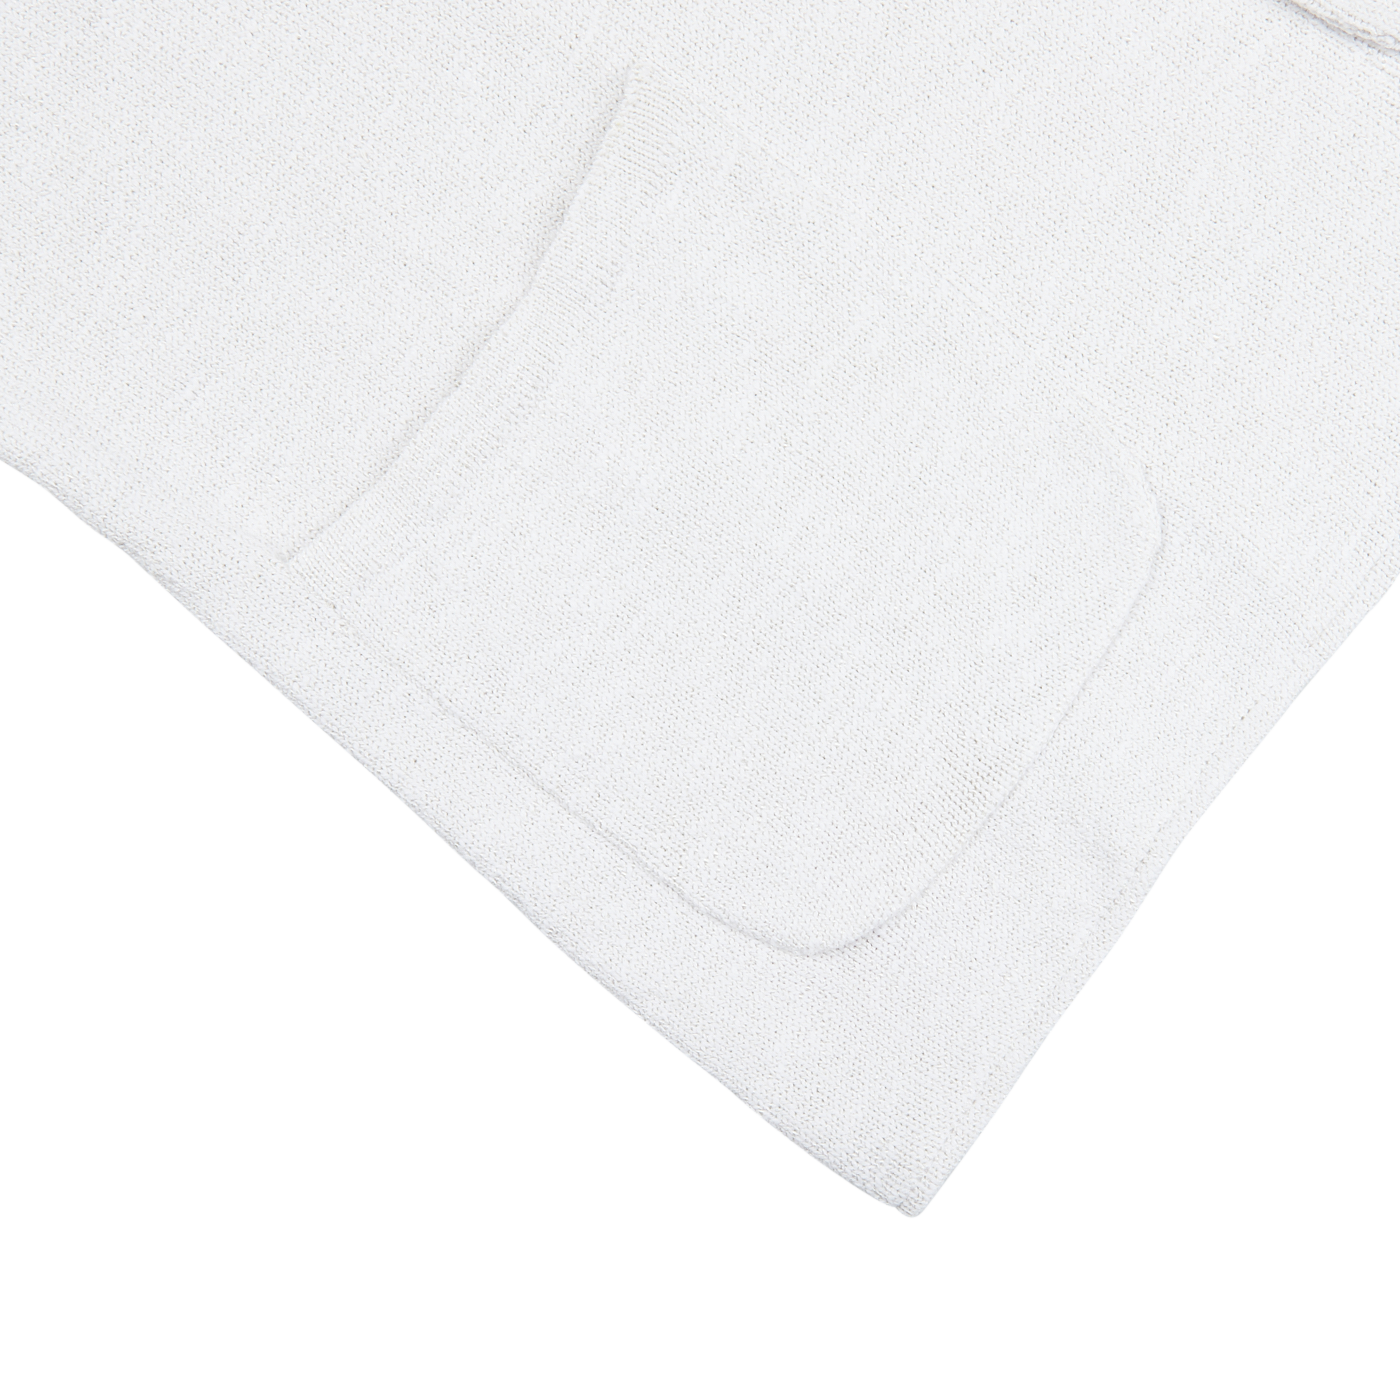 A Cream White Cotton Mouline Swacket with a pocket on it, made with a cotton-viscose blend by Maurizio Baldassari.